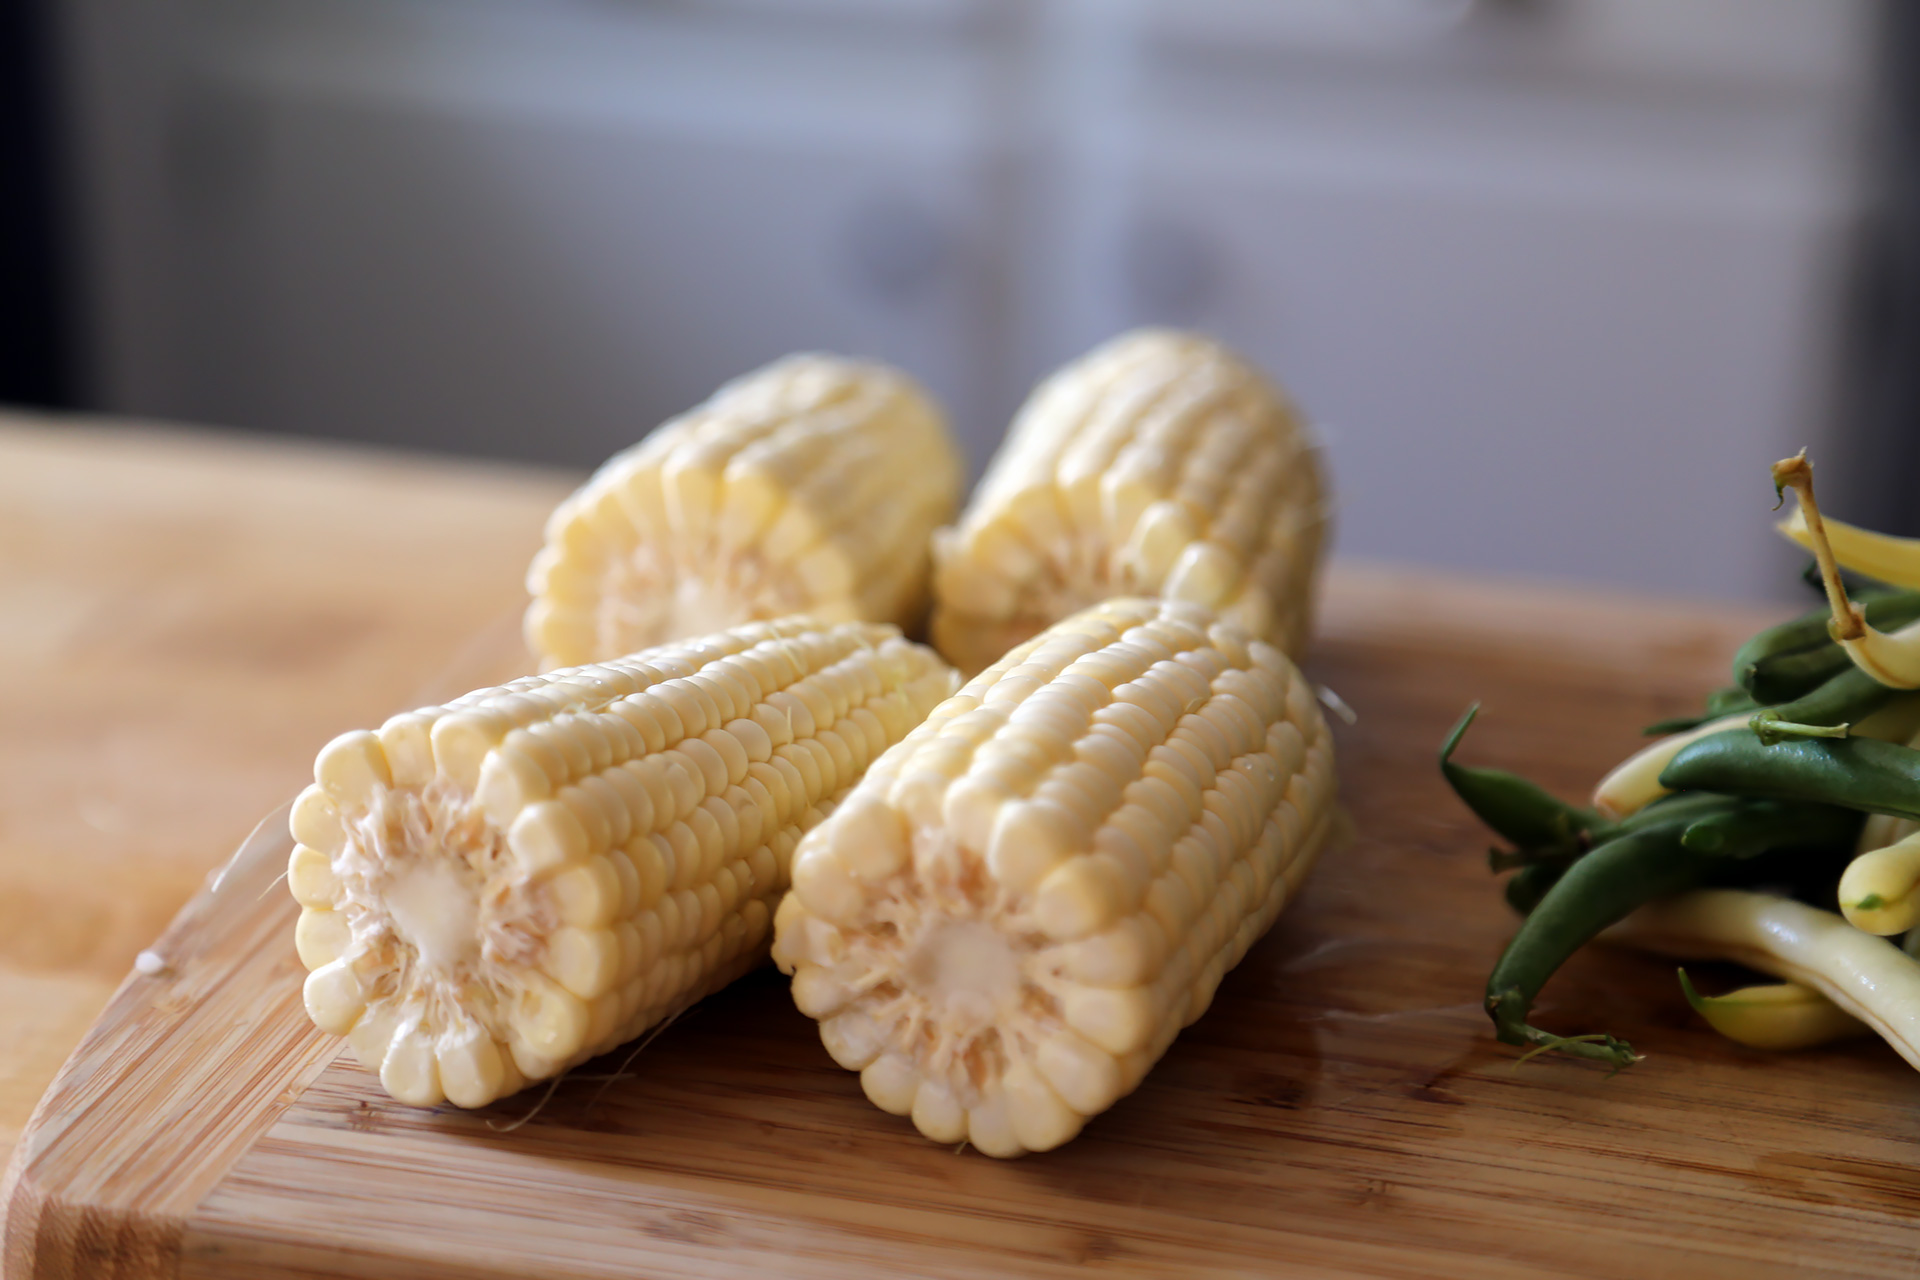 To cut the kernels off the cob, snap or cut the cob in half crosswise.